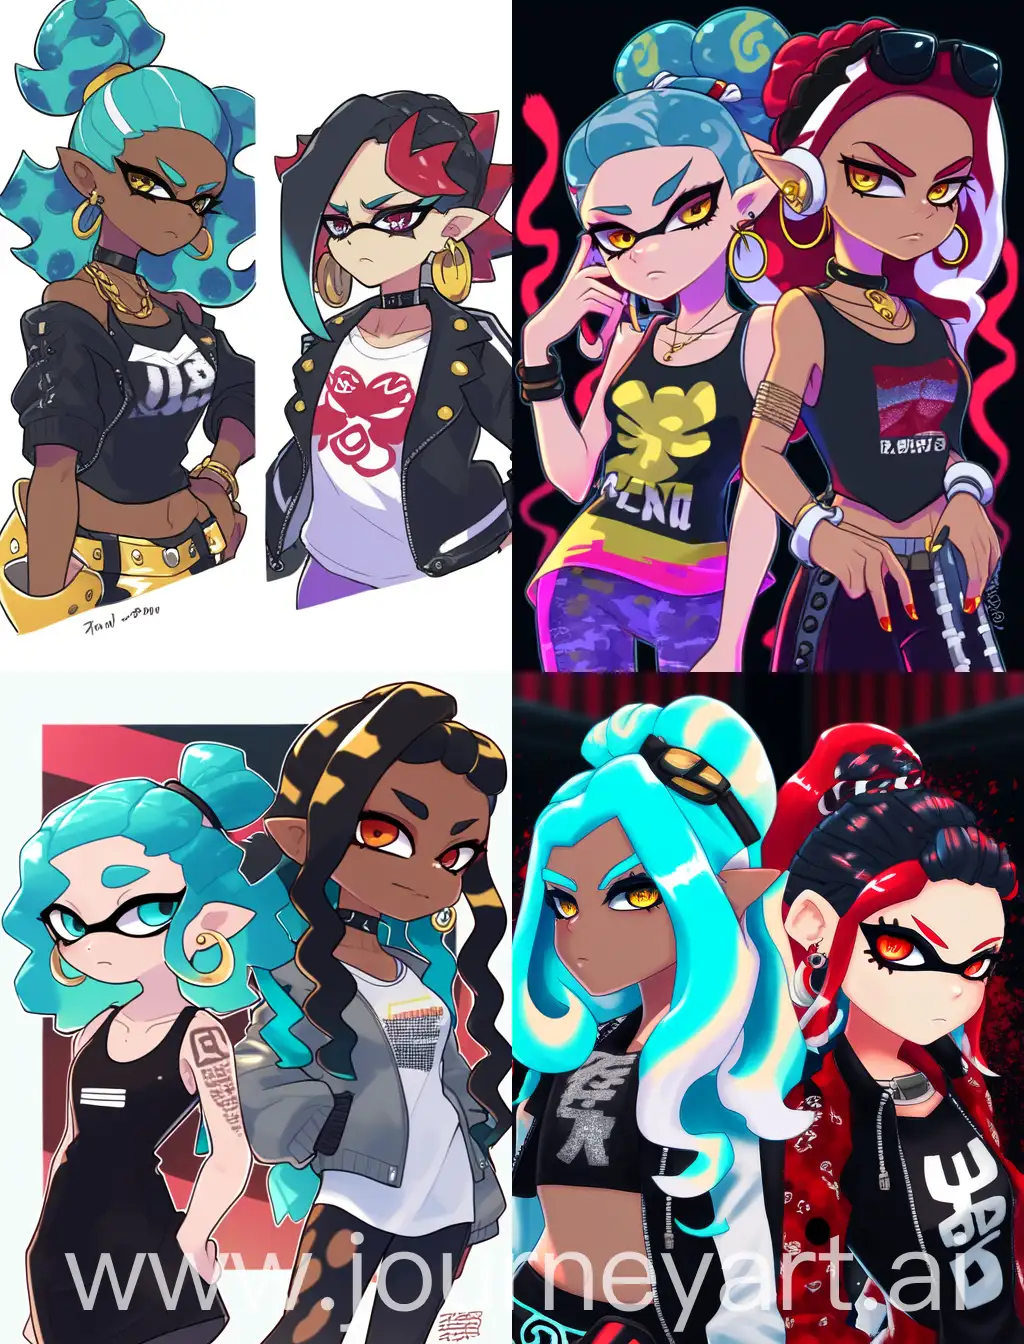 Splatoon art style, Seita Inoue style, Art of Splatoon, Art of Splatoon 2, Art of Splatoon 3, concept art, metal rock idol duo; cyan white long curly hair, light skin, ethereal blue eyes with white lashes, rorita fashion, octoling girl on left; red black short curly hair, dark skin, sultry gold eyes, punk fashion, inkling girl on right; performing on stage, villain vibes, Squid Sisters inspired, Babymetal inspired, NANA inspired, red and cyan lightning, white and black clothing contrast between two characters, detailed eyelashes, Splatoon official artstyle, ombre fingertips